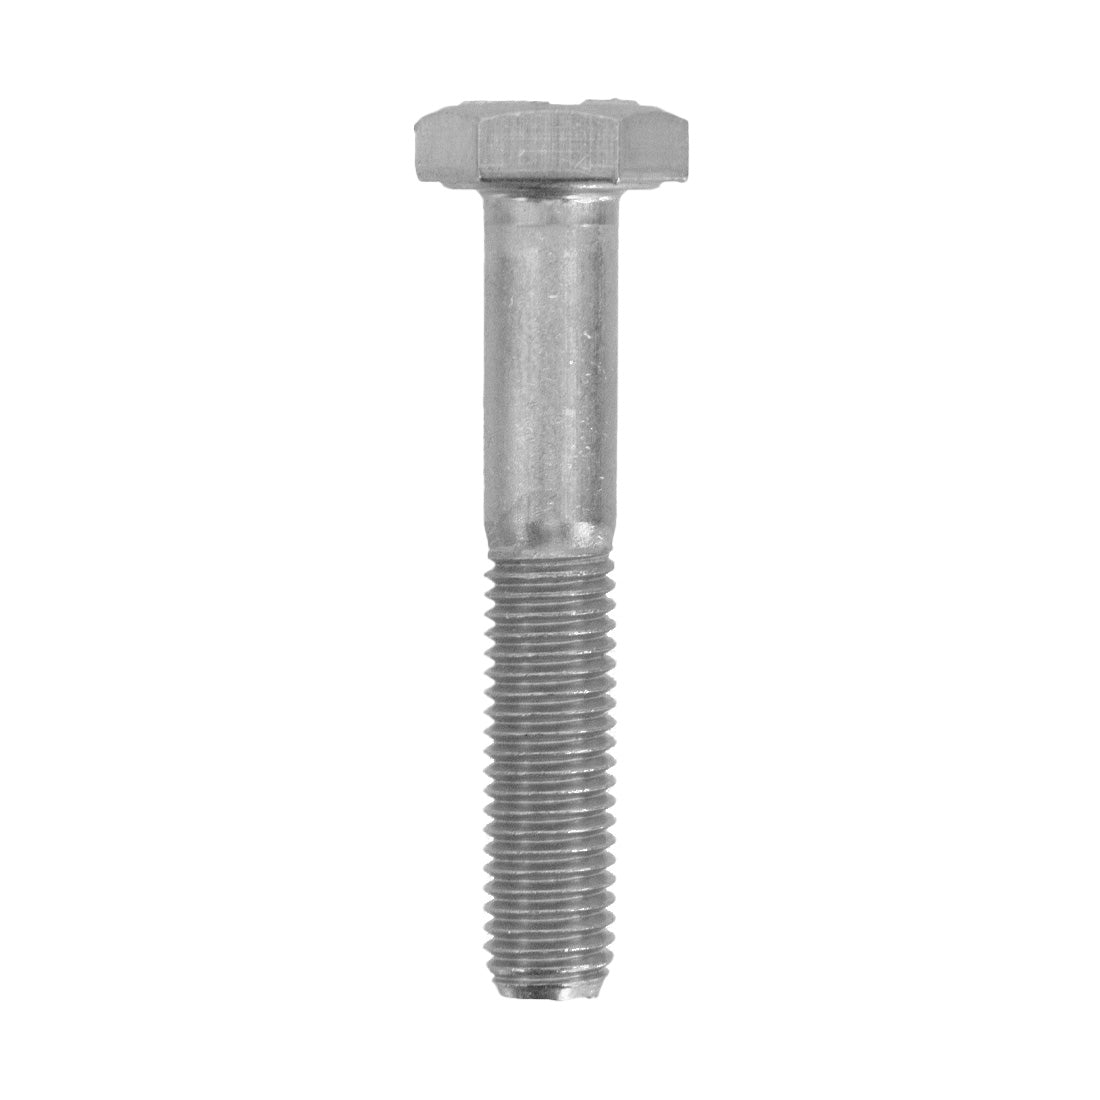 XERO Pure Hex Bolt, SS, 1/4 - 28x1.5 L Product View